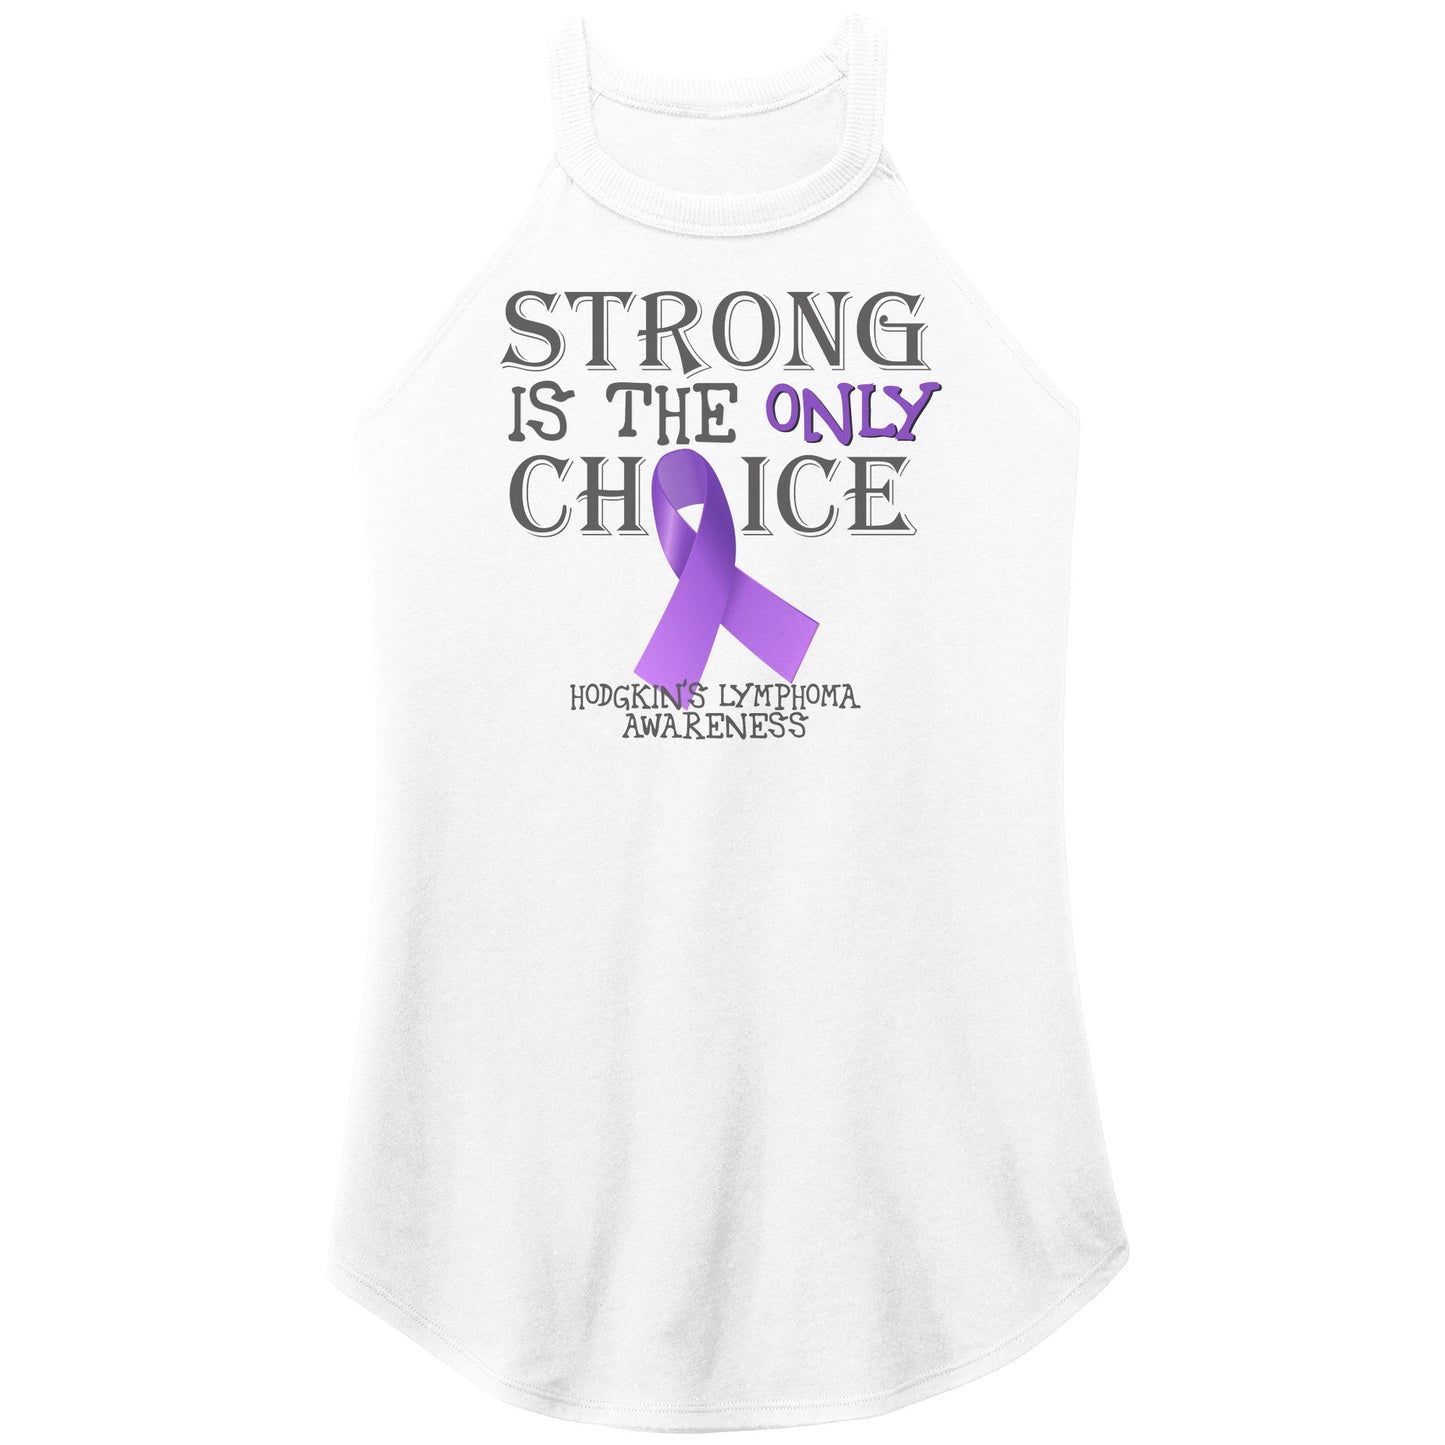 Strong is the Only Choice -Hodgkin's Lymphoma Awareness T-Shirt, Hoodie, Tank |x|